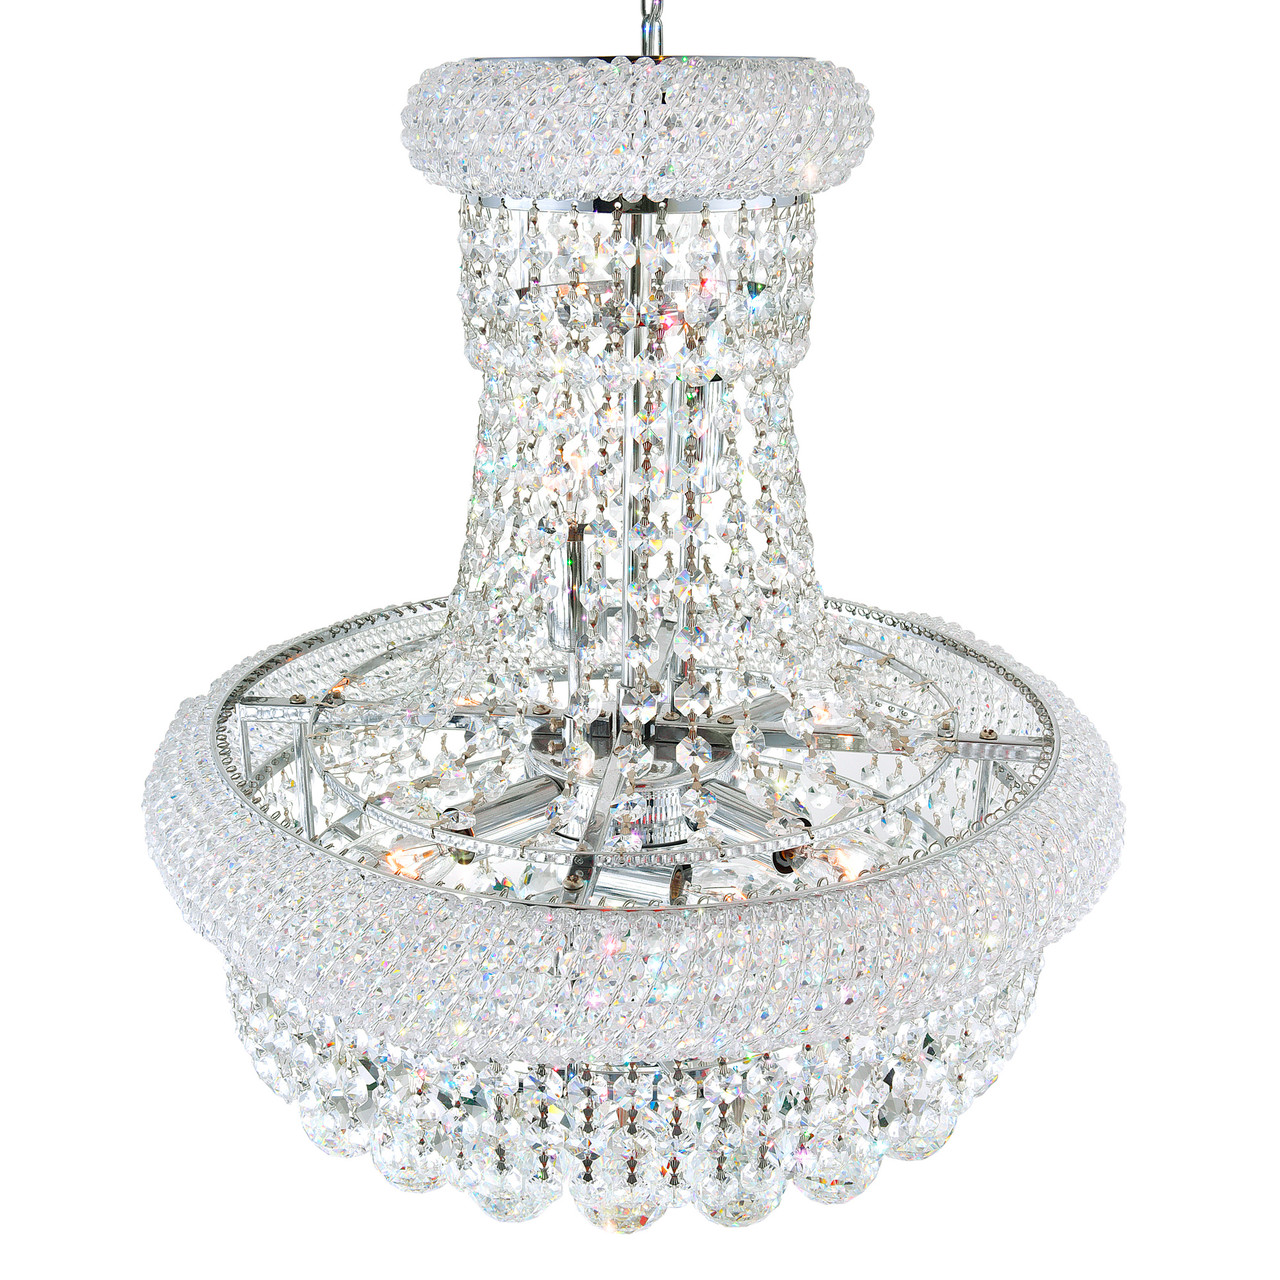 CWI LIGHTING 8001P20C 14 Light Down Chandelier with Chrome finish